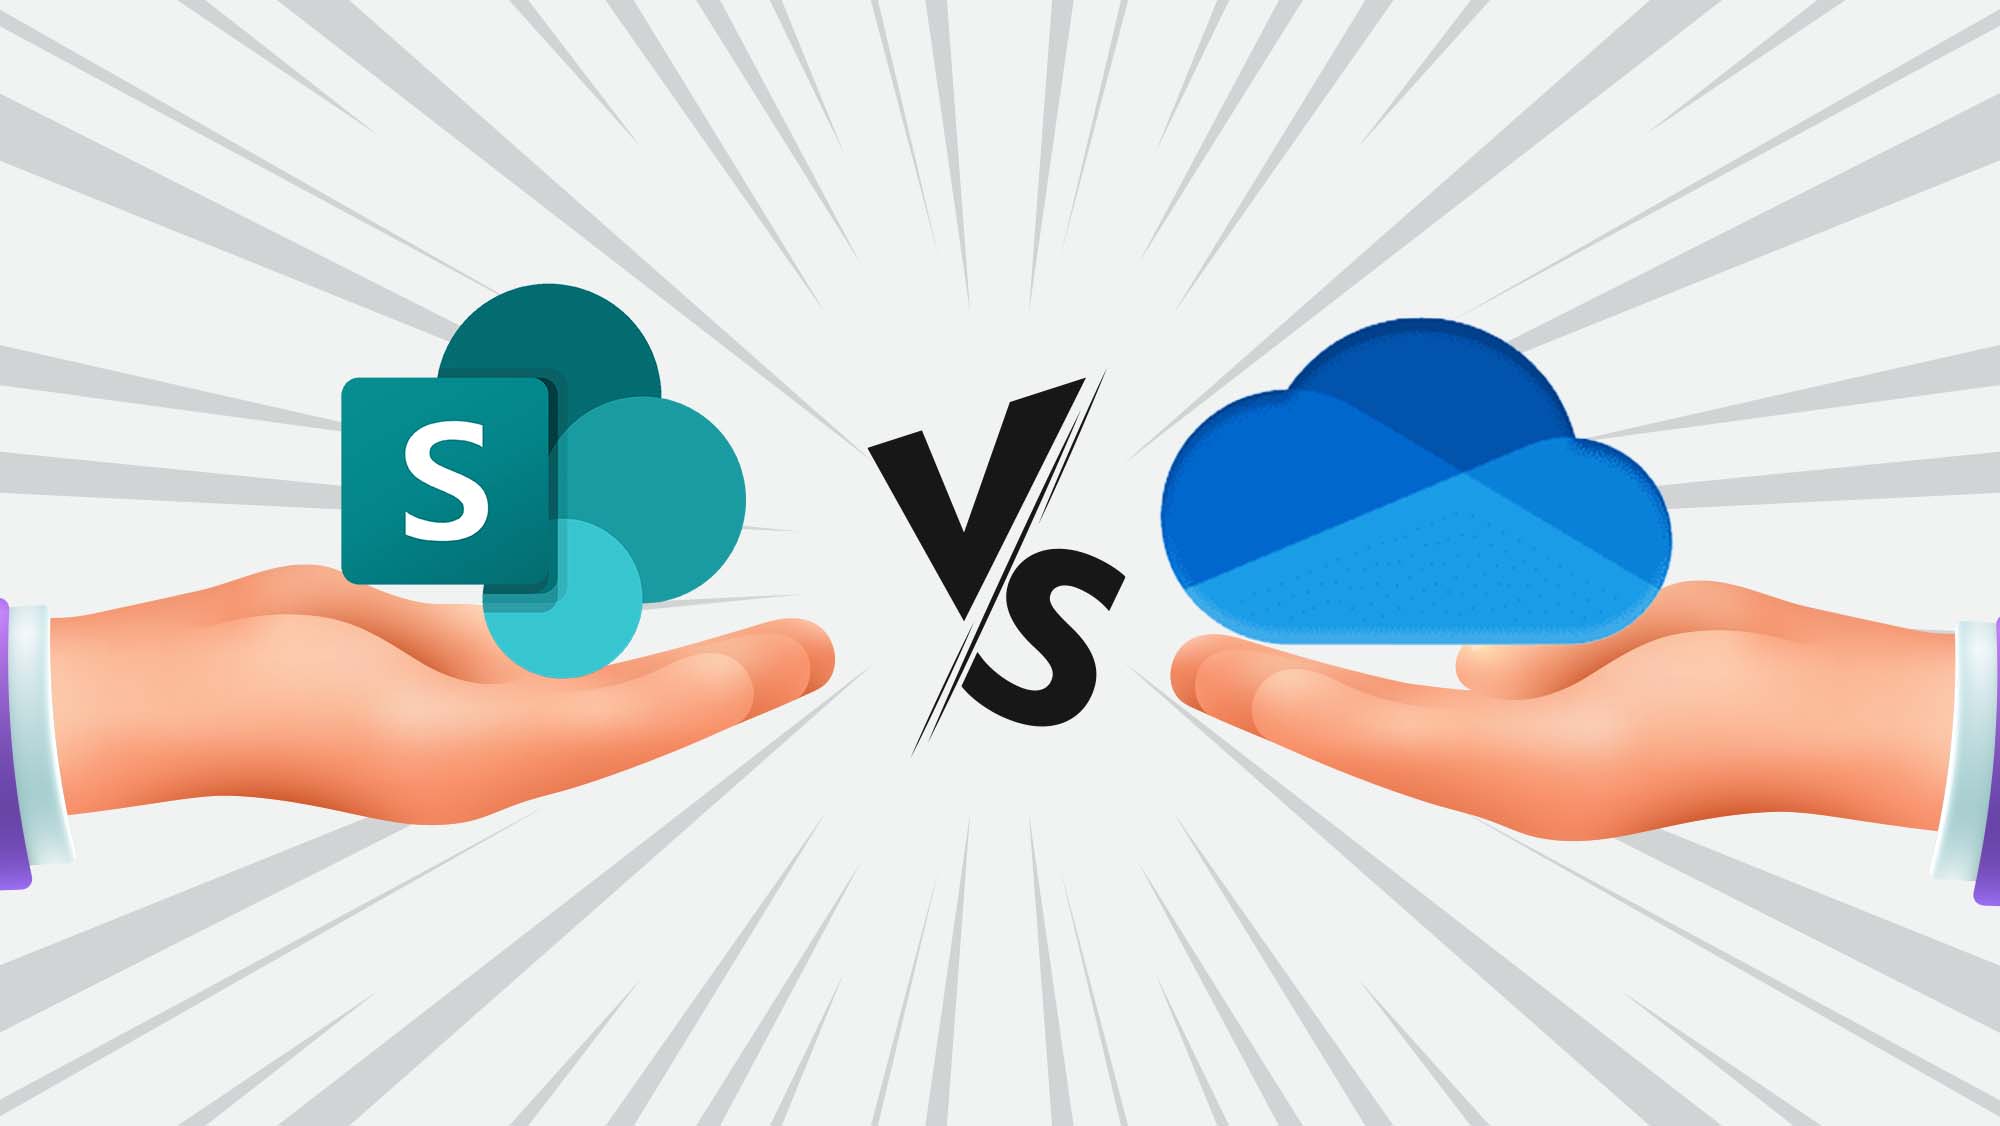 SharePoint vs OneDrive – Differences and Similarities